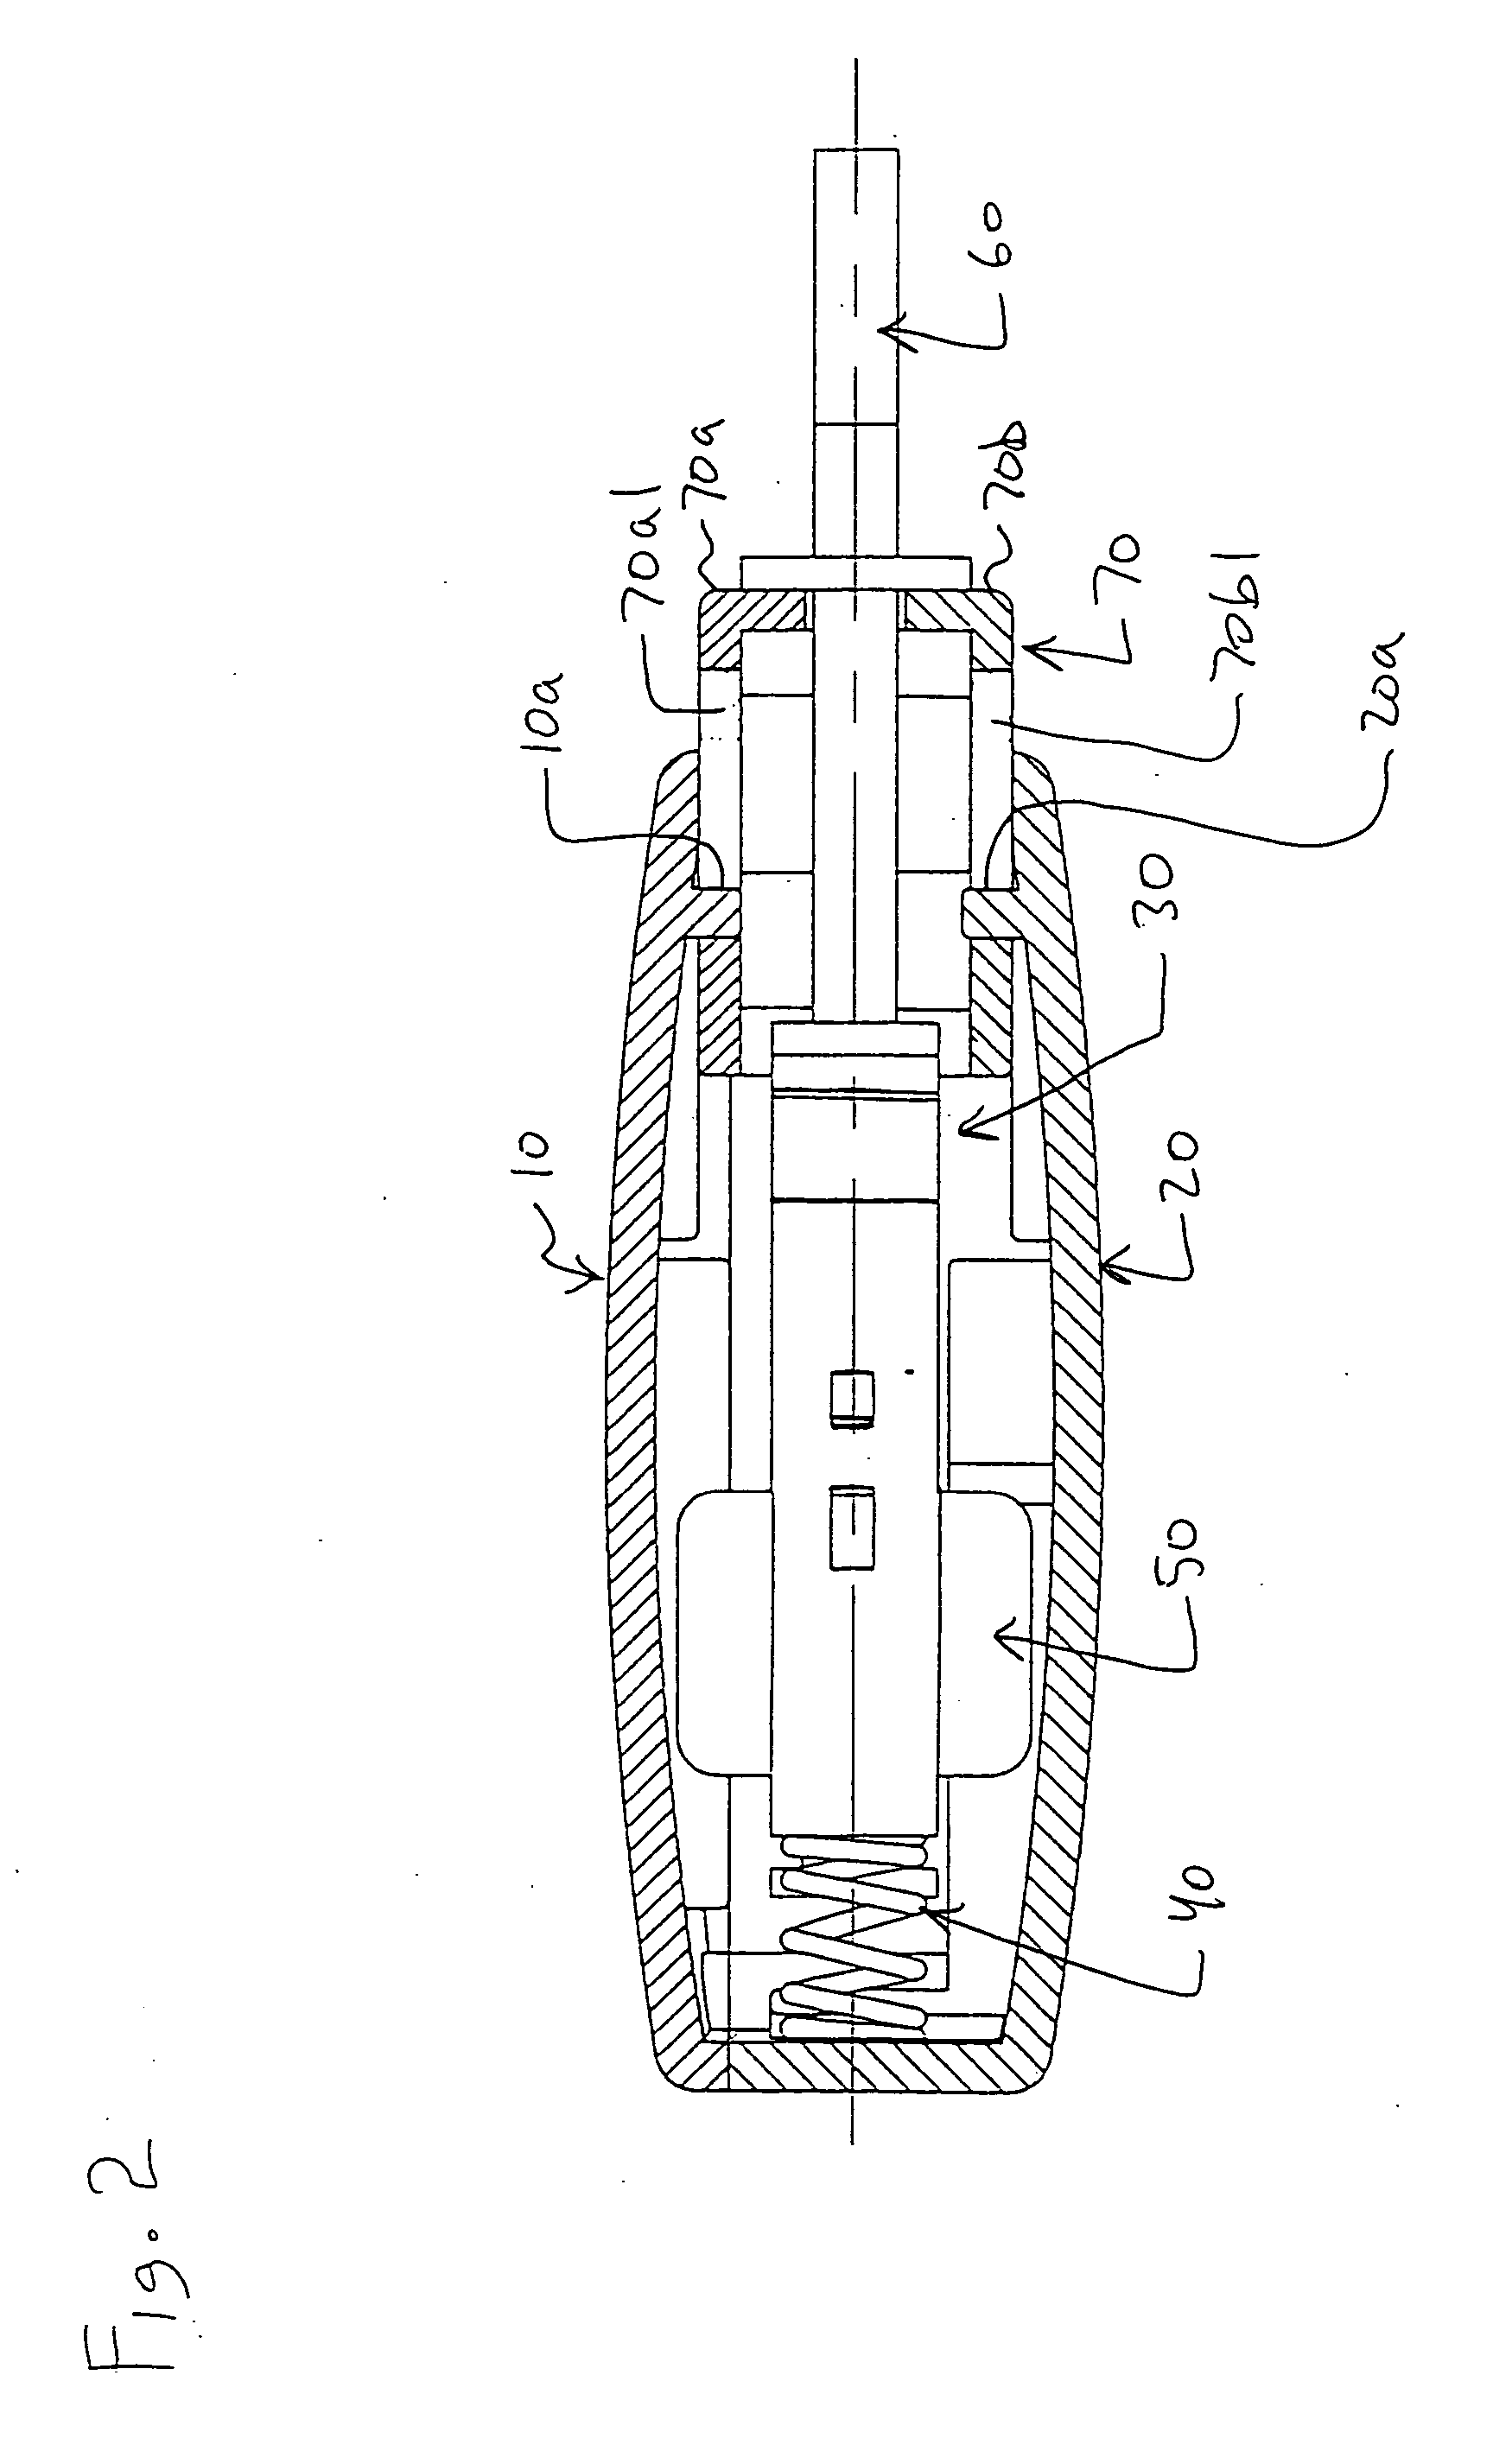 Disposable or single-use lancet device and method